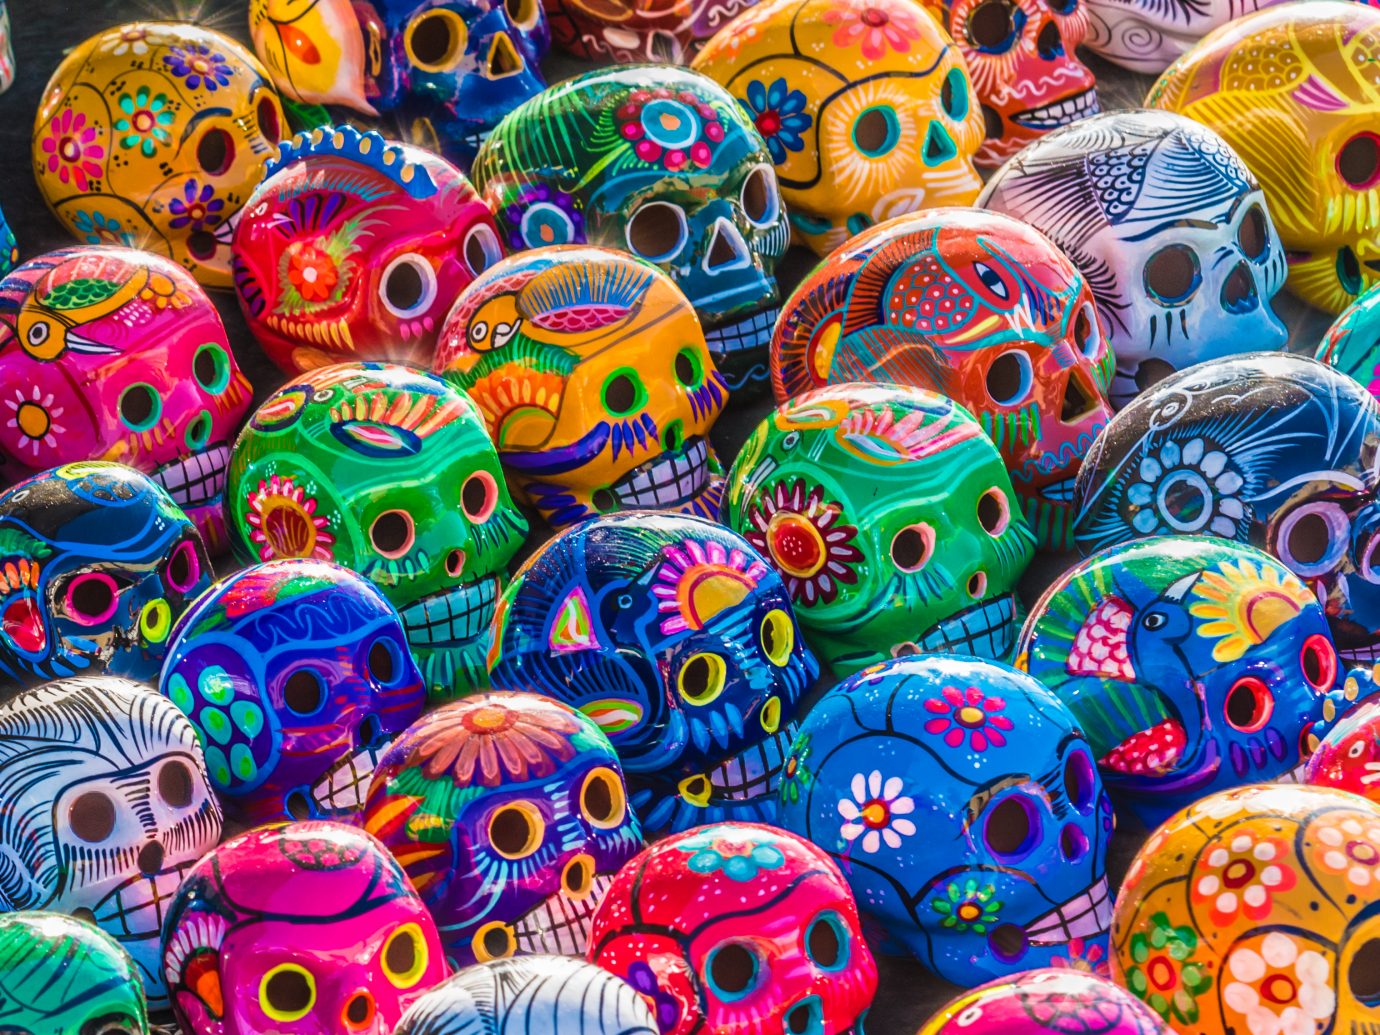 Mexican Culture Fiesta: Colorful (colourful) traditional Mexican/hispanic ceramic pottery Day of the Dead (Dia de los Muertos) skulls on display at a market in Mexico.